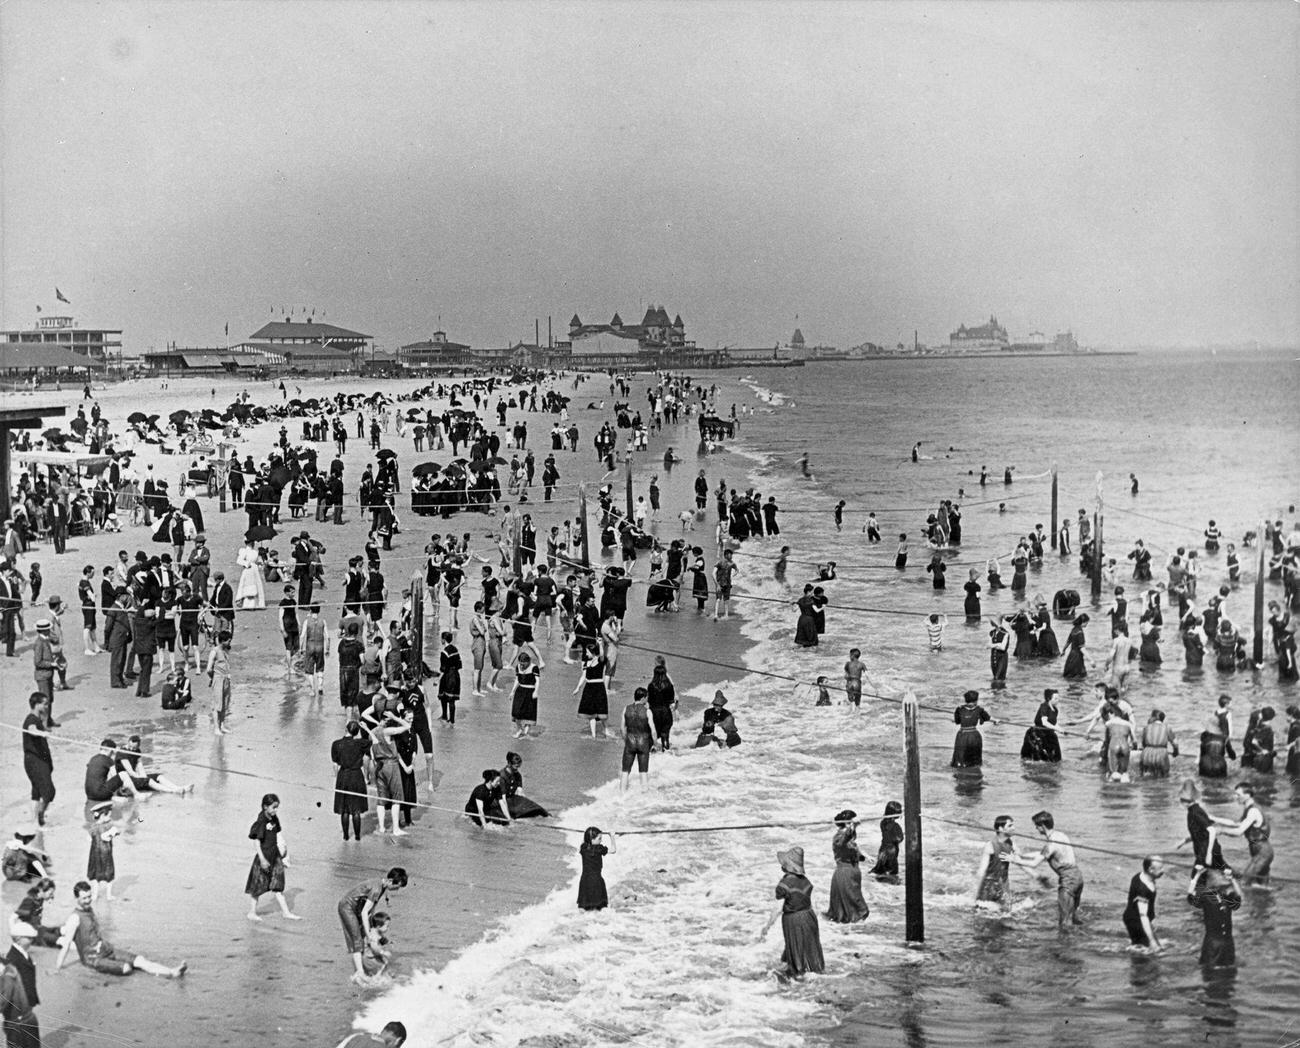 People On Beach And In Boat At Coney Island, 1898